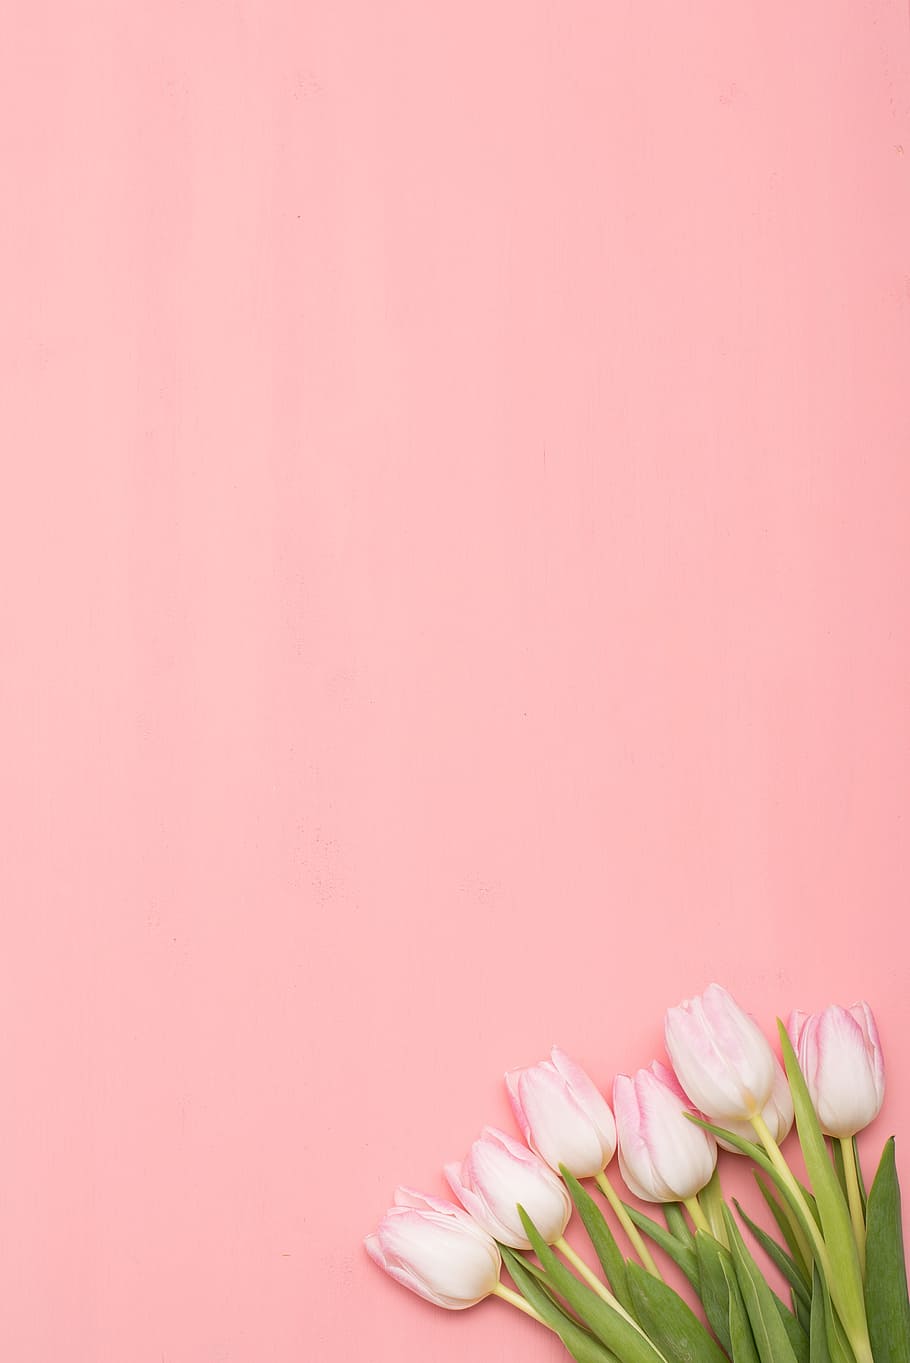 A pink background with white tulips - Tulip